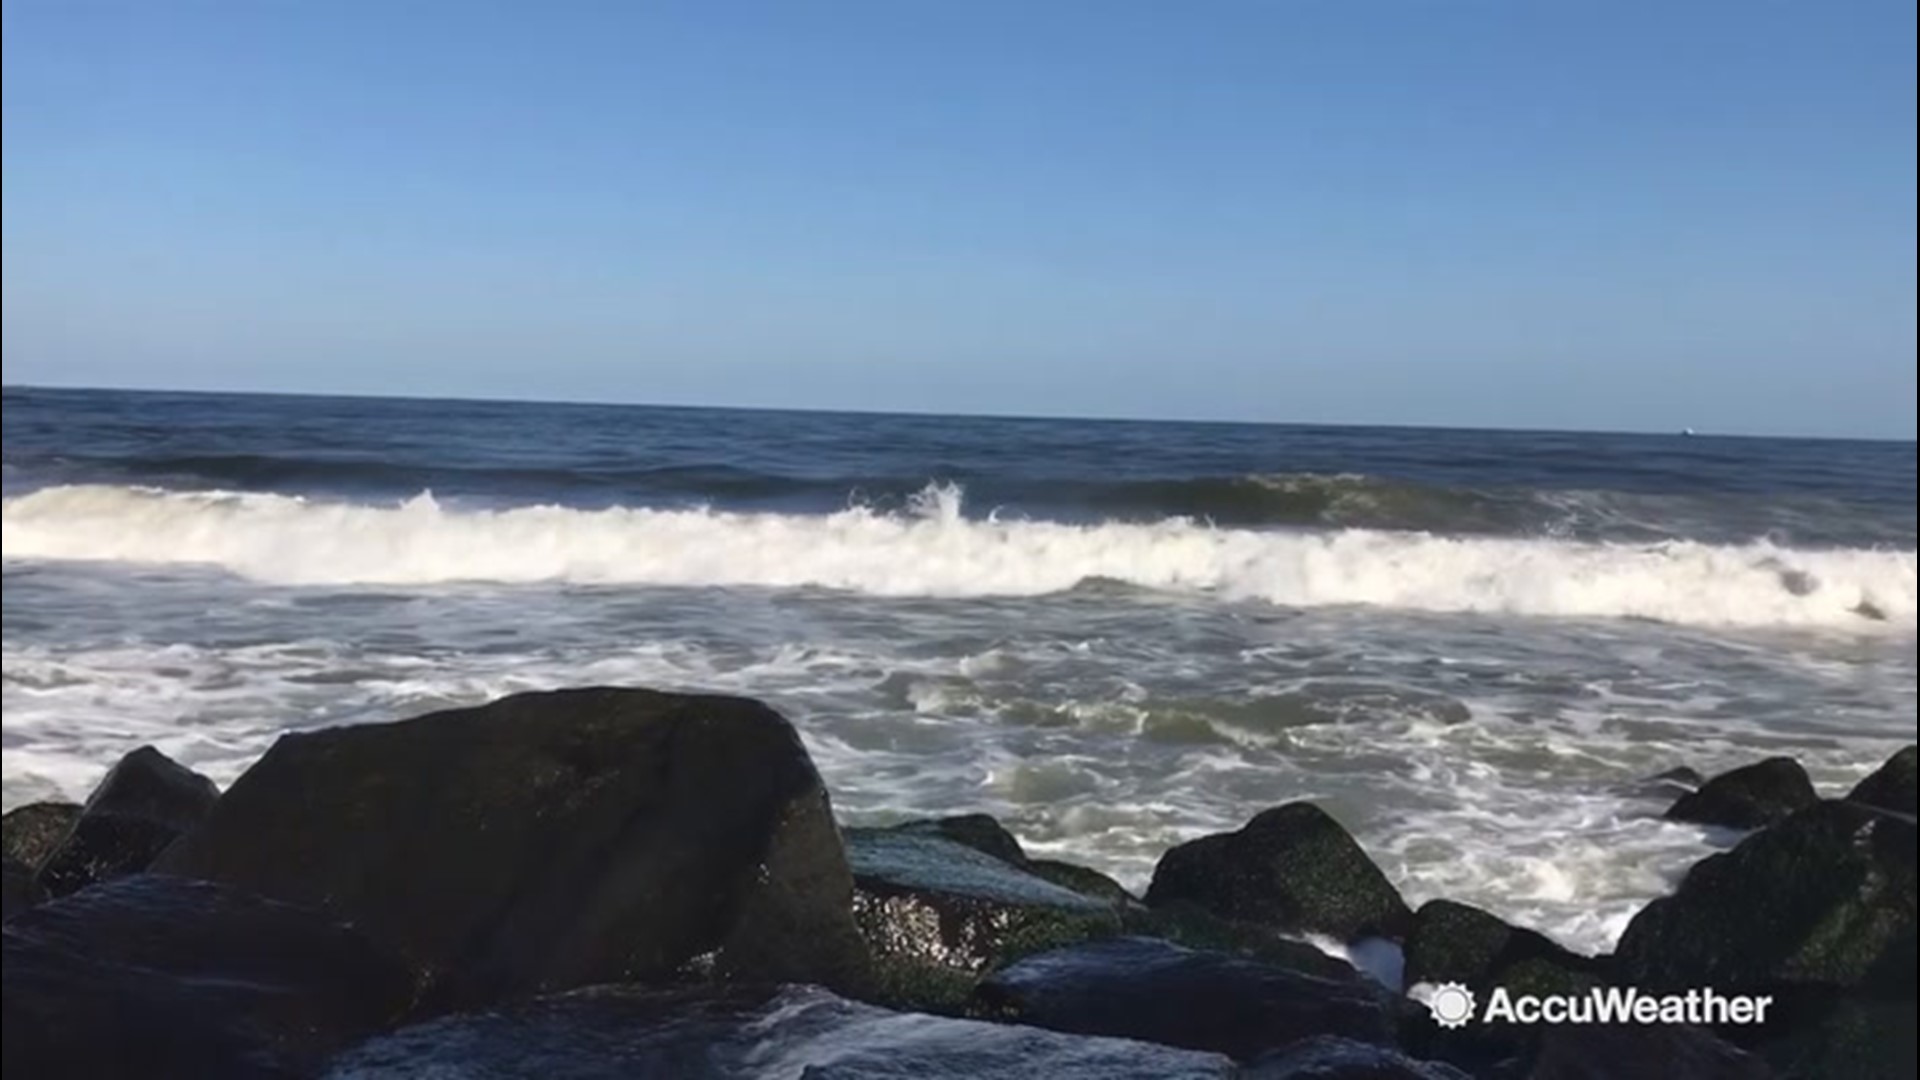 Manasquan, New Jersey, was treated to a beautiful, sunny day on Friday, Sept. 19, with roaring waves.